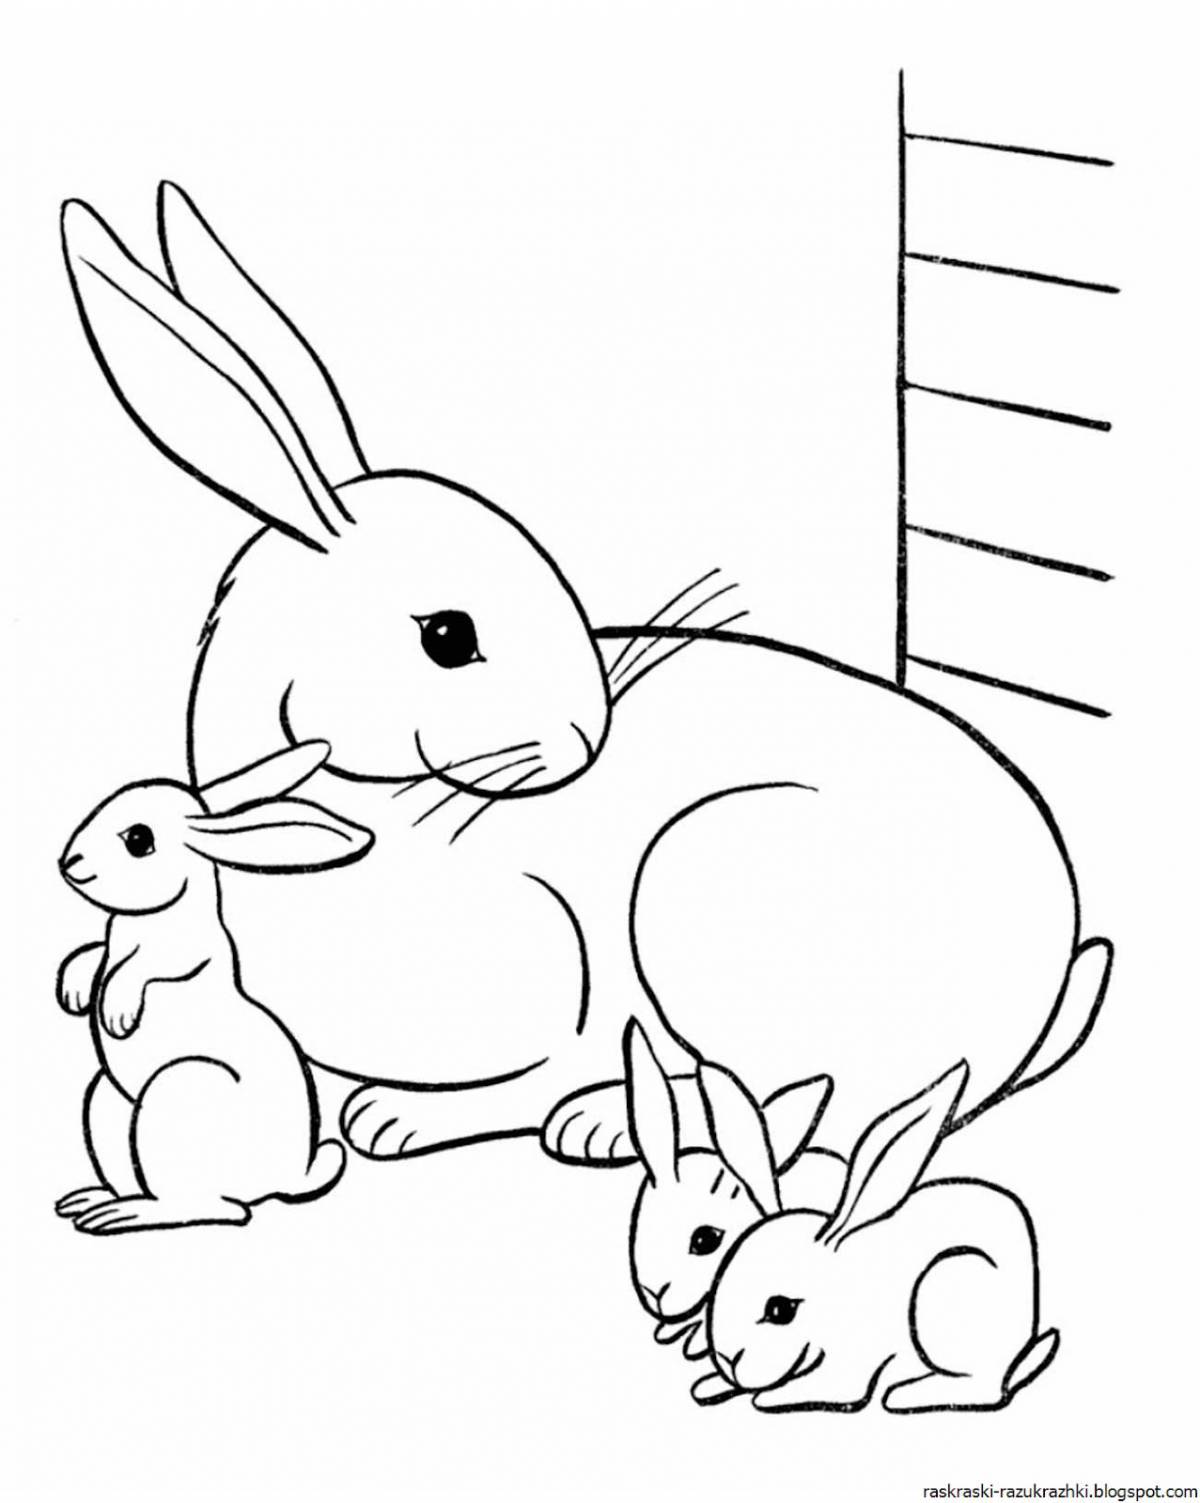 Wonderful coloring hare for kids